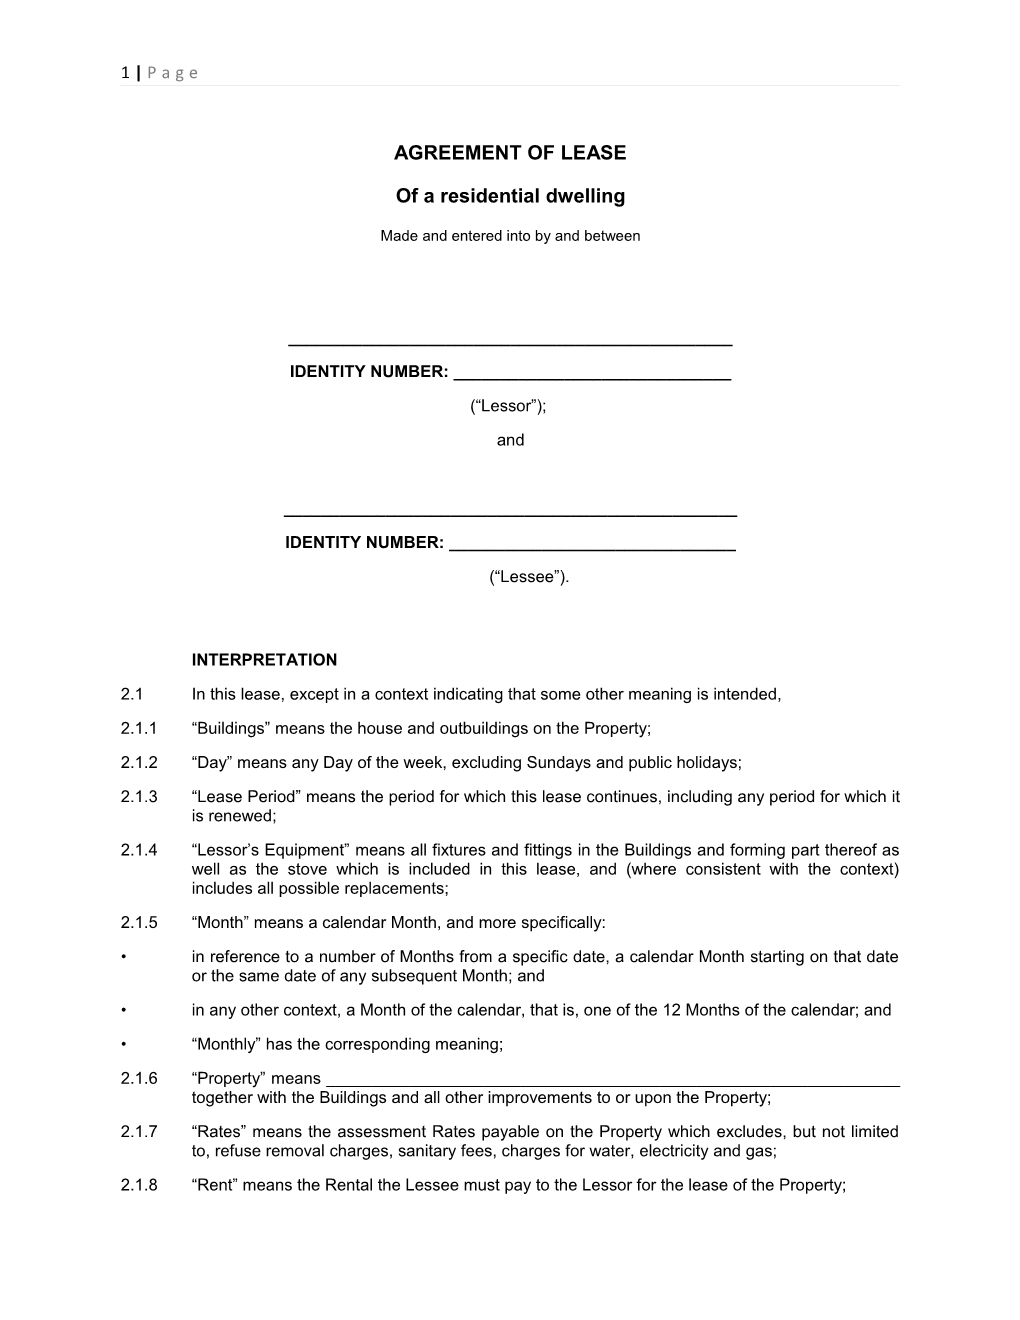 Agreement of Lease of an Unfurnished House